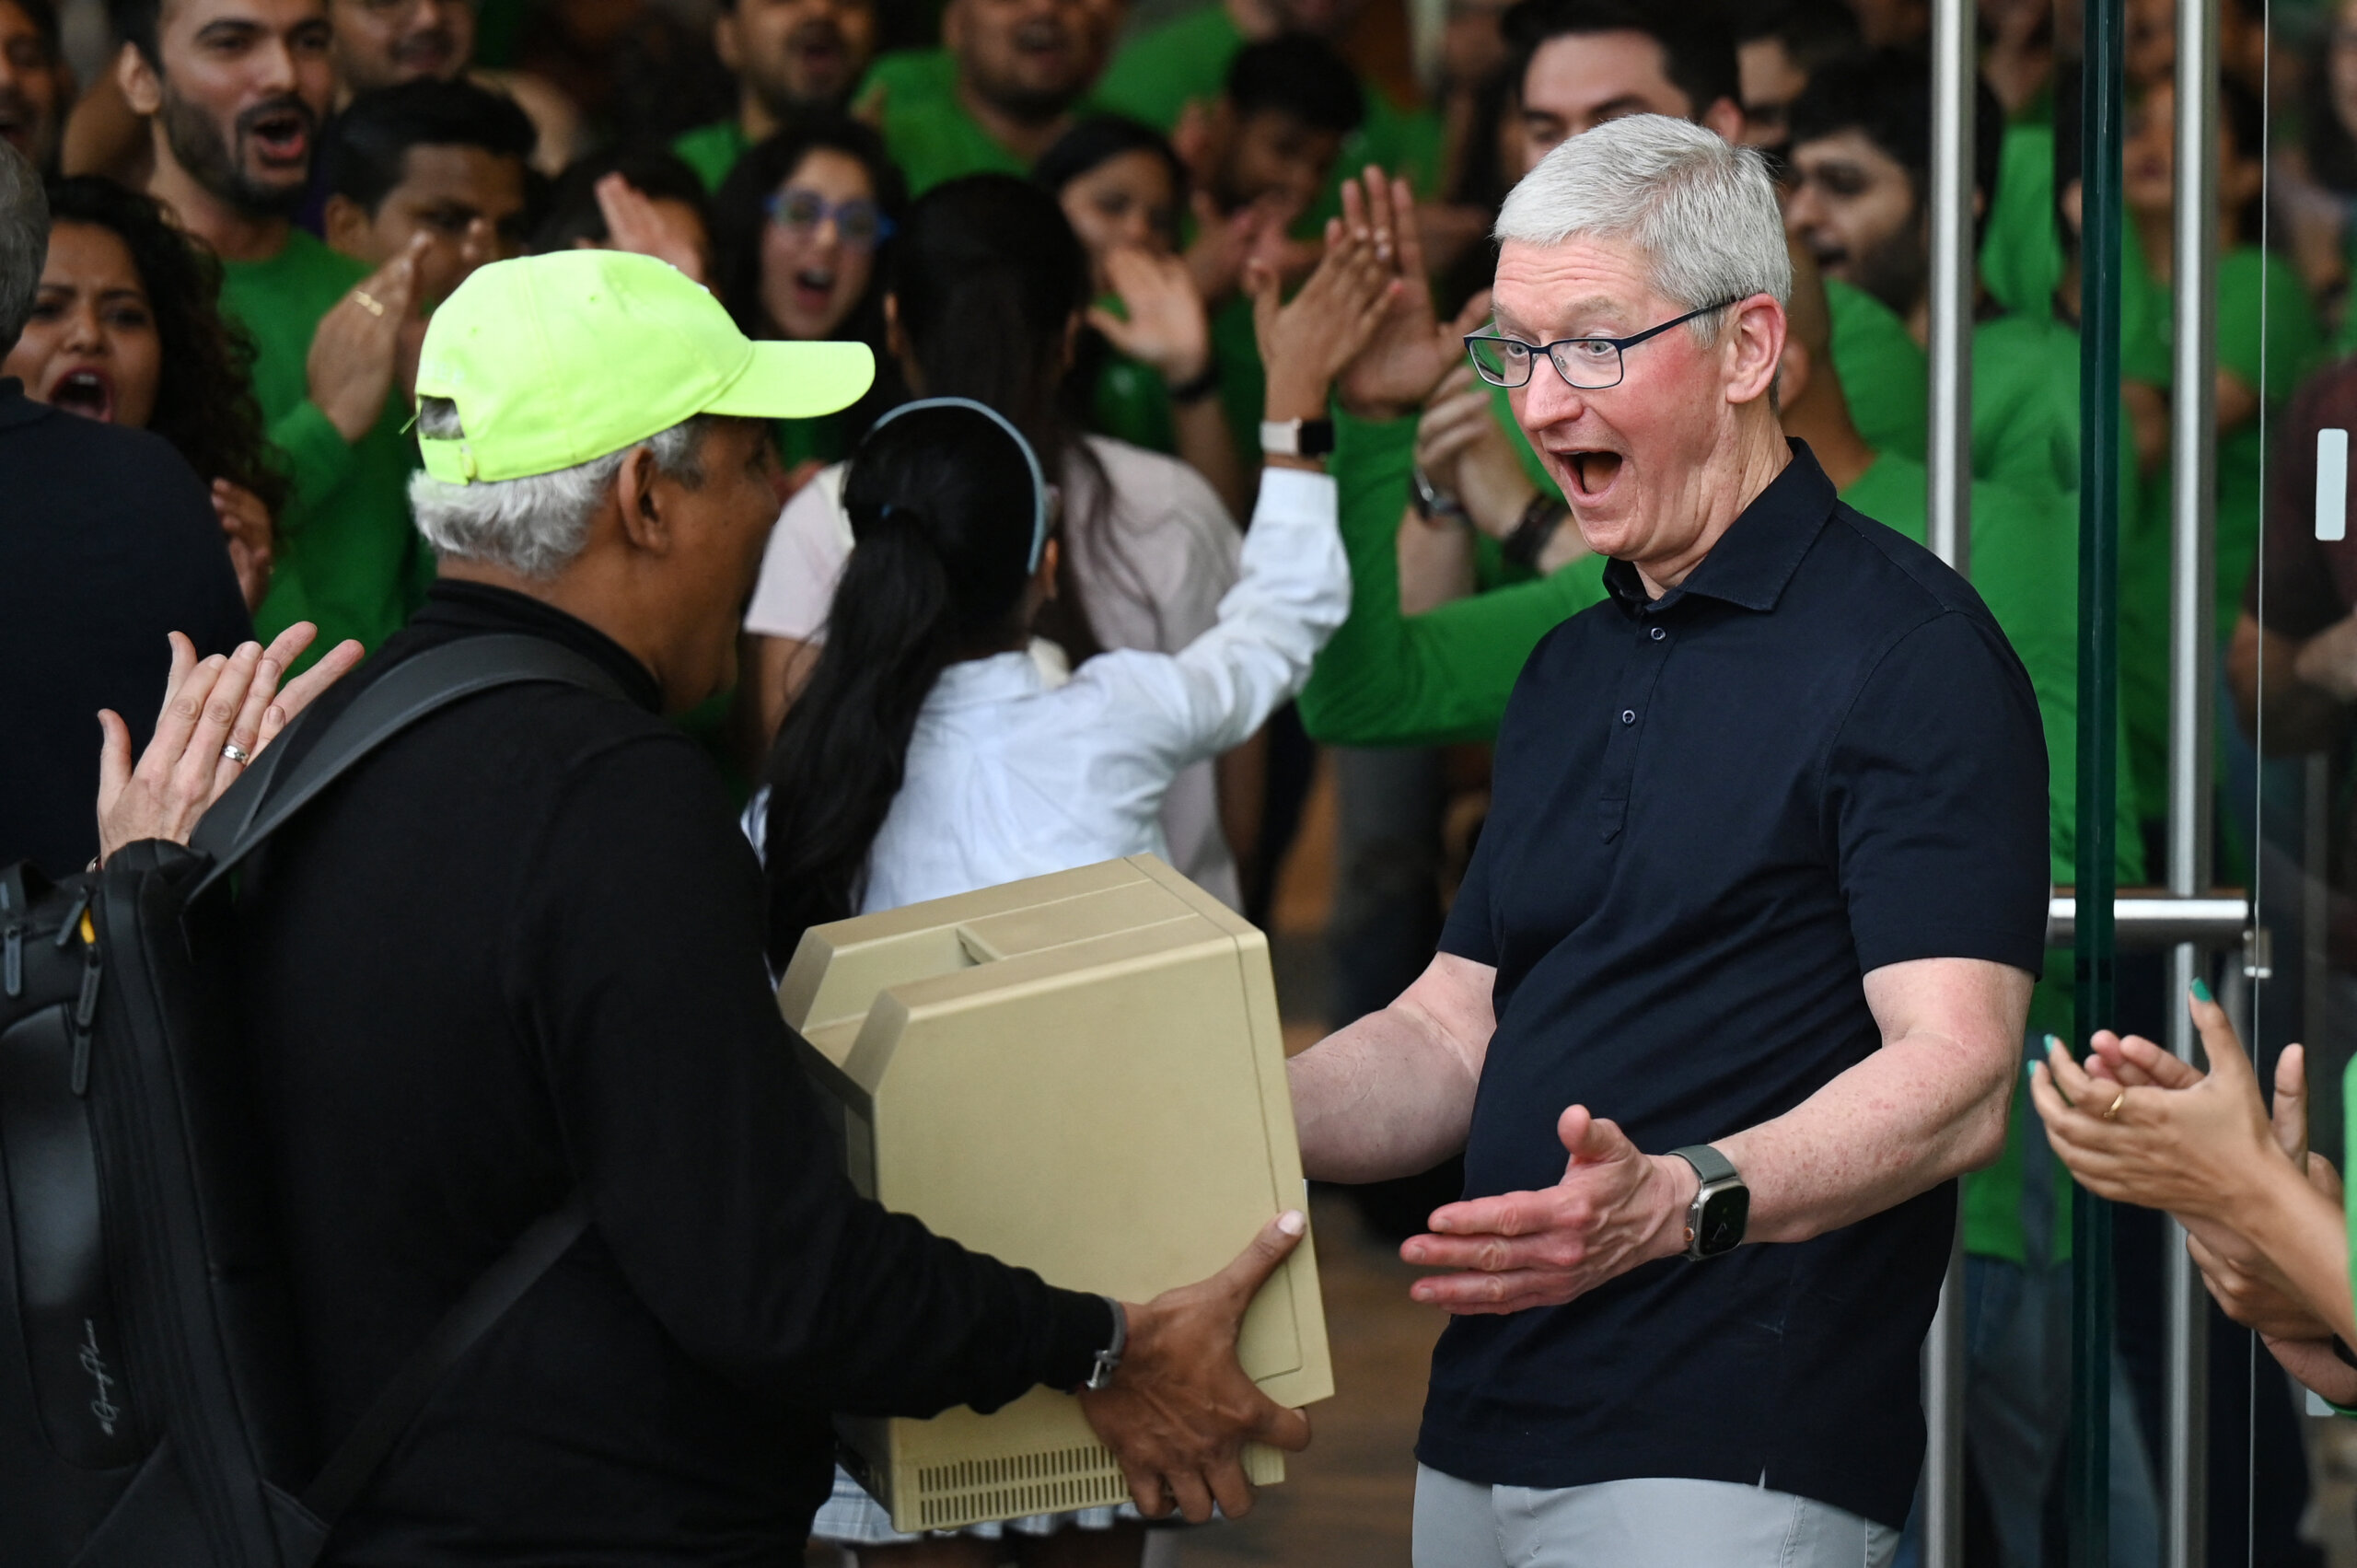 Chief Executive Officer of Apple Tim Cook (R) reacts as a man shows him a Macintosh SE computer during the opening of Apple's first retail store in India, in Mumbai on April 18, 2023. - Apple opened its first retail store in India on April 18, underscoring the US tech titan's increasing focus on the South Asian nation as a key sales market and alternative manufacturing hub to China. (Photo by Punit PARANJPE / AFP)